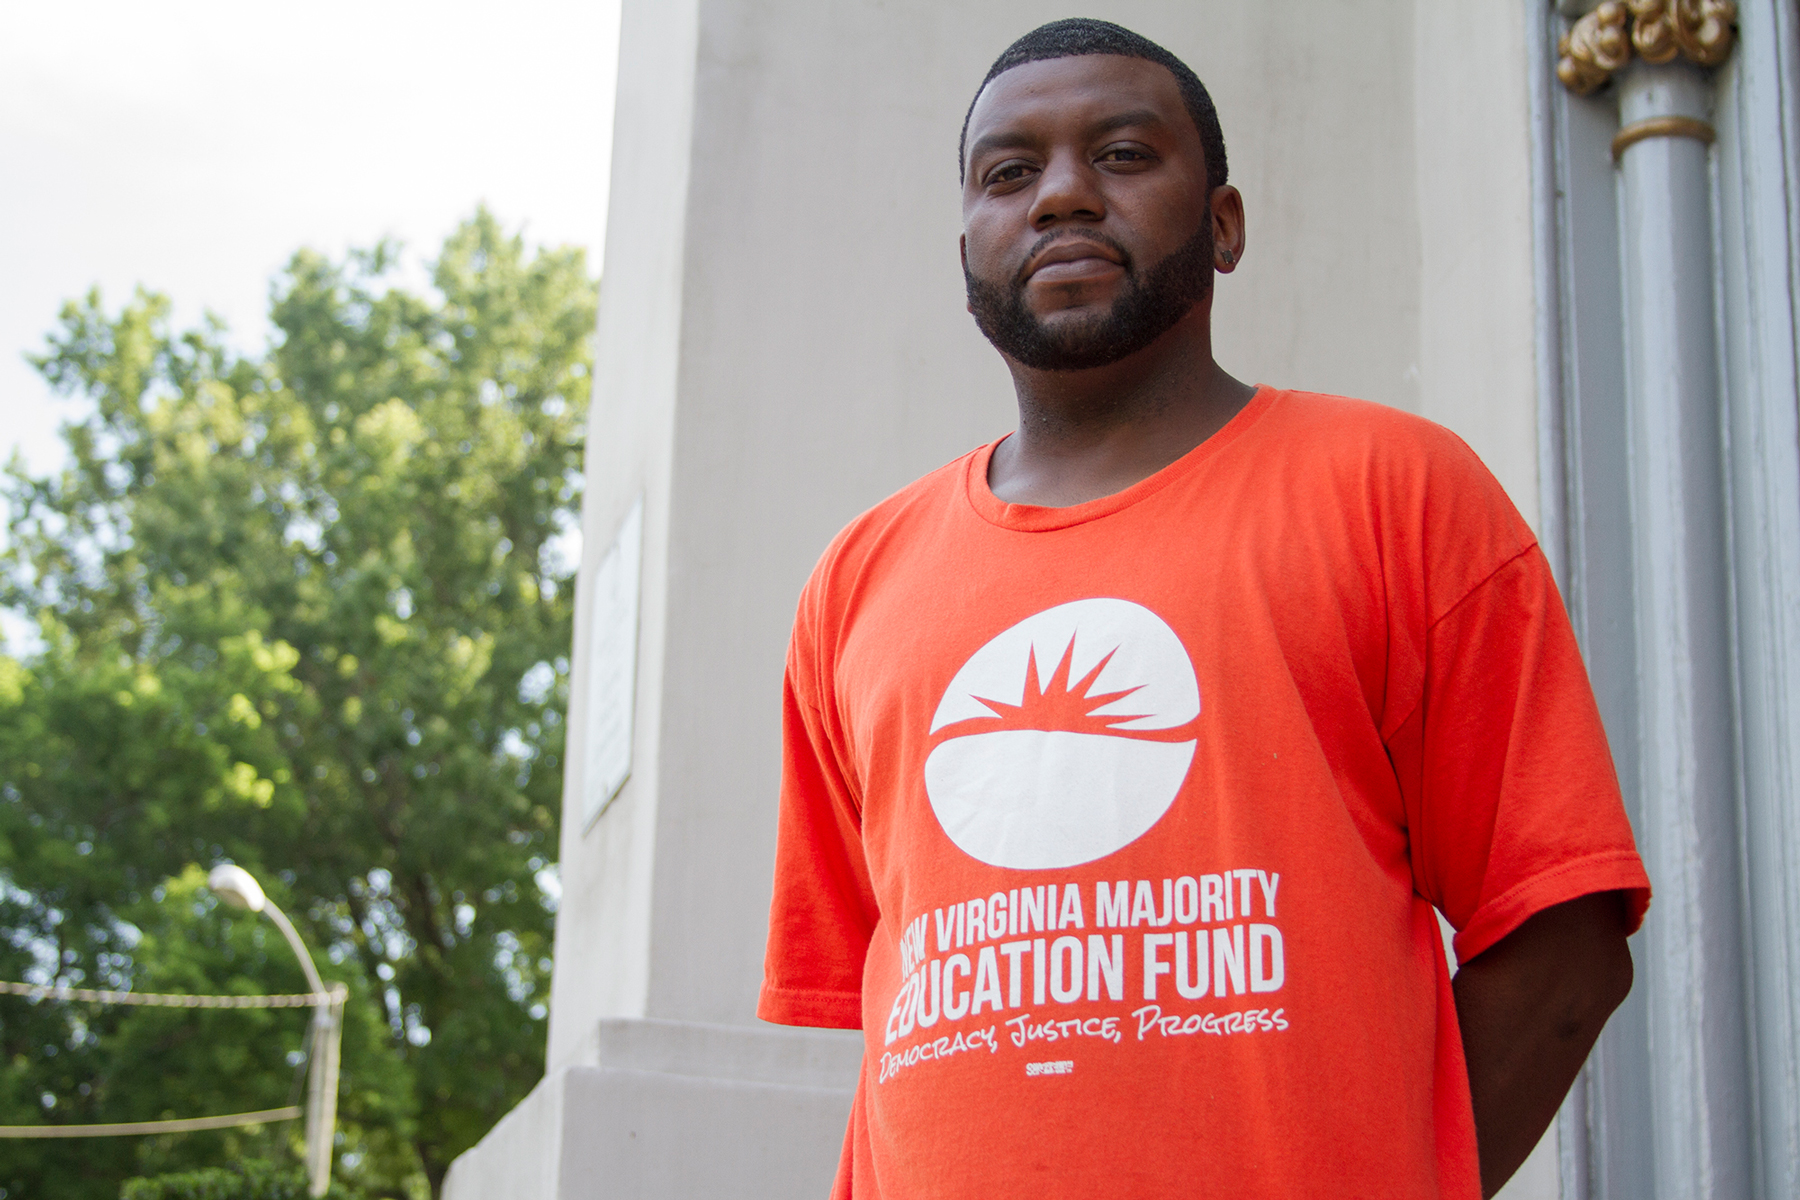 As a staff member with the New Virginia Majority Education Fund, Brandon Polly reaches out to felons living in and around Norfolk, helping them understand their rights and navigate the re-enfranchisement process. (Marianna Hauglie/News21)